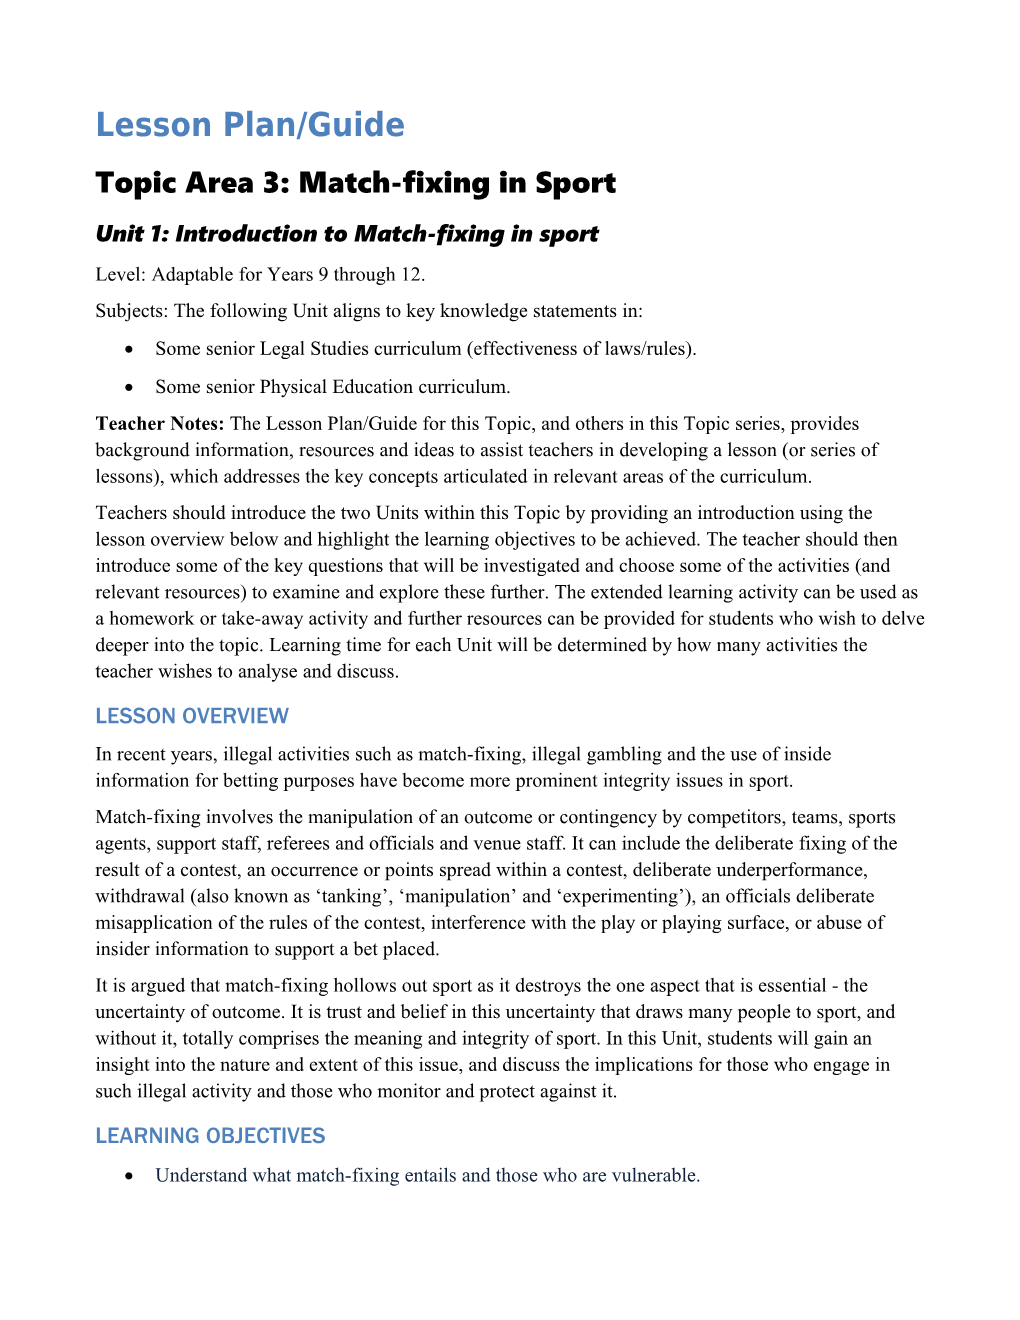 Topic Area 3: Match-Fixing in Sport